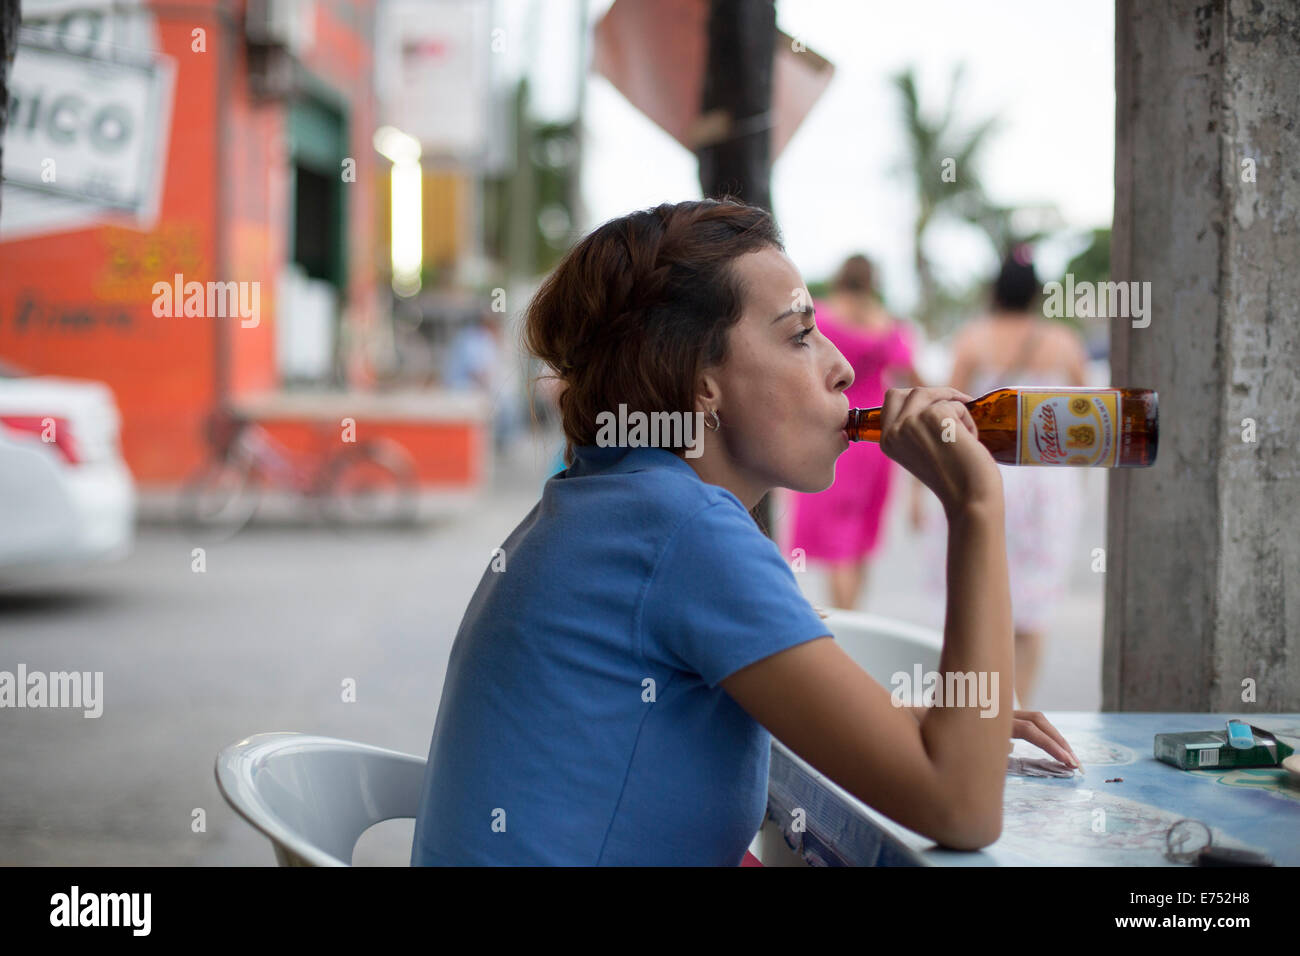 woman drinking bottle beer from neck outside bar Stock Photo